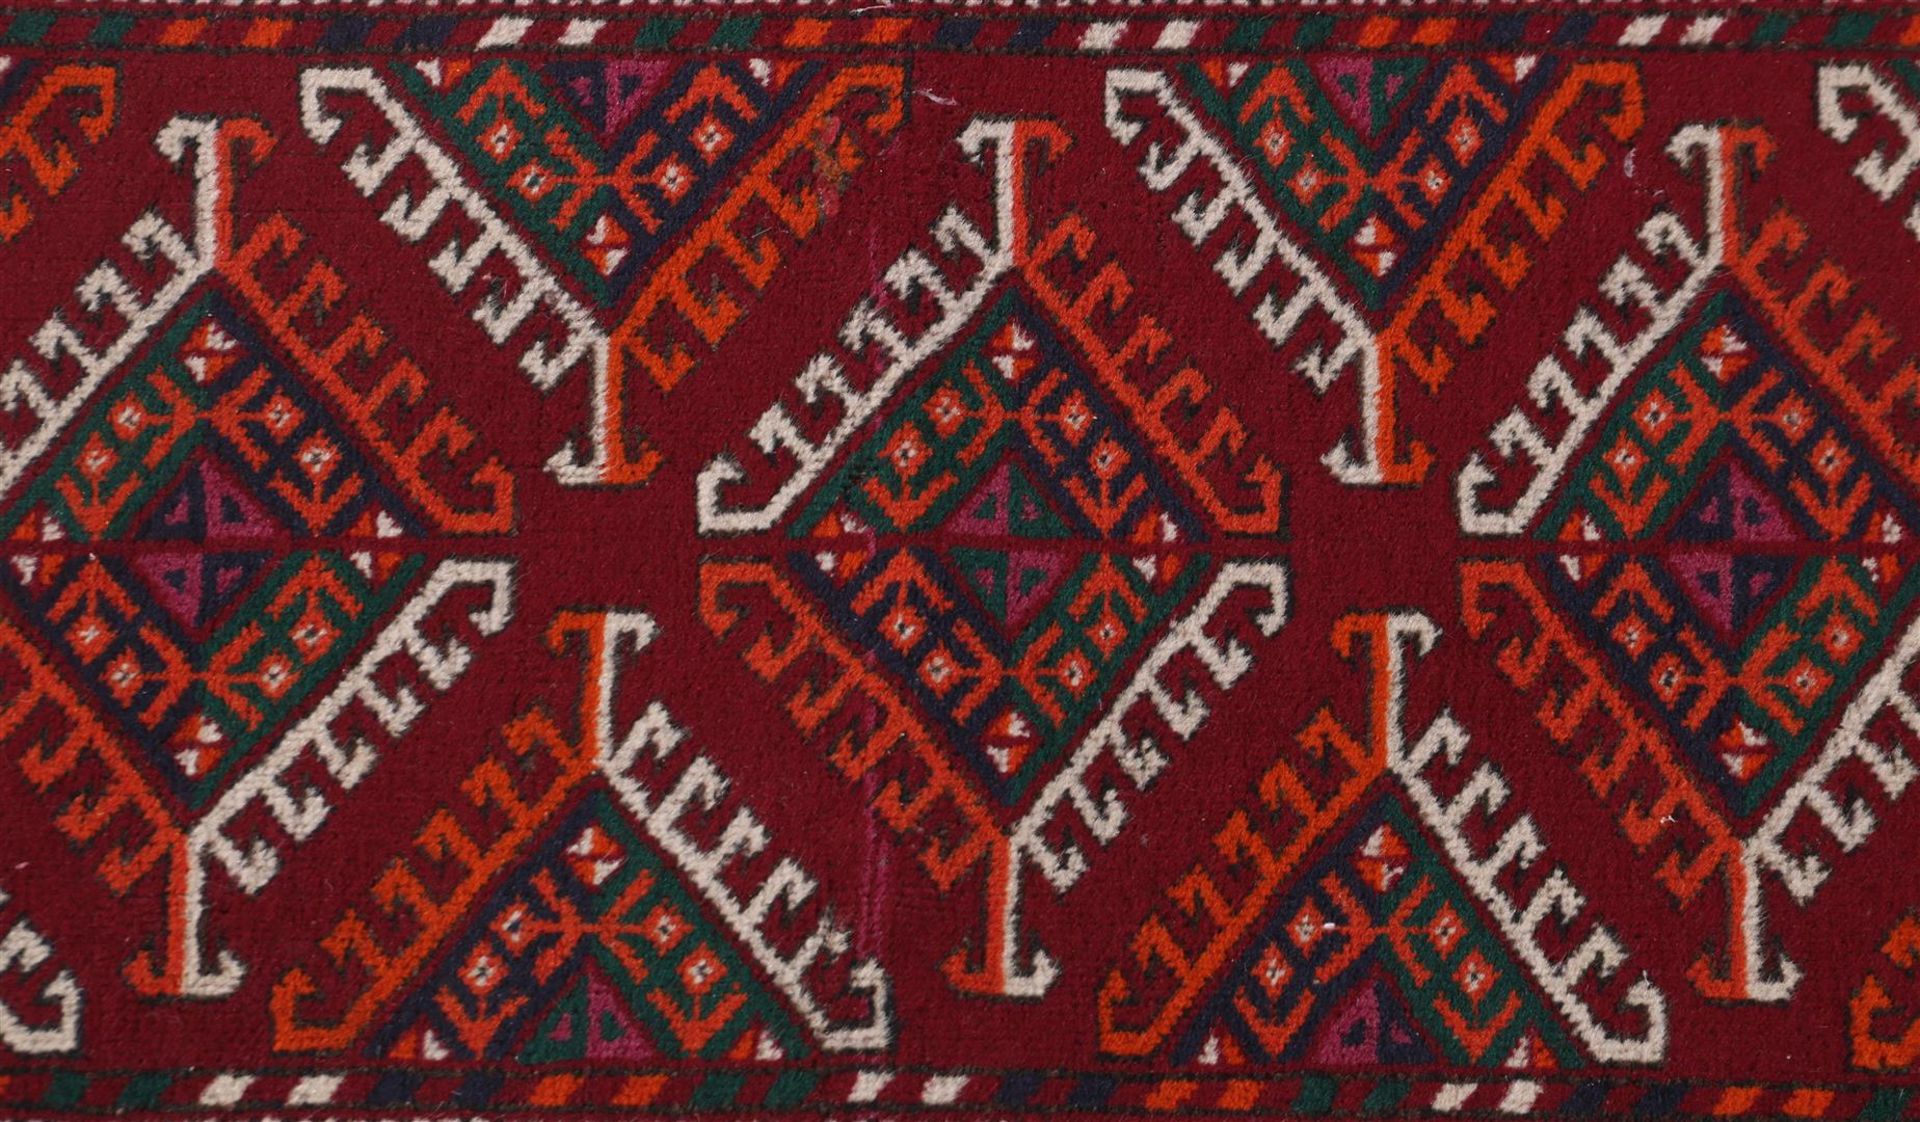 Hand-knotted oriental carpet, Turkmenistan - Image 2 of 4